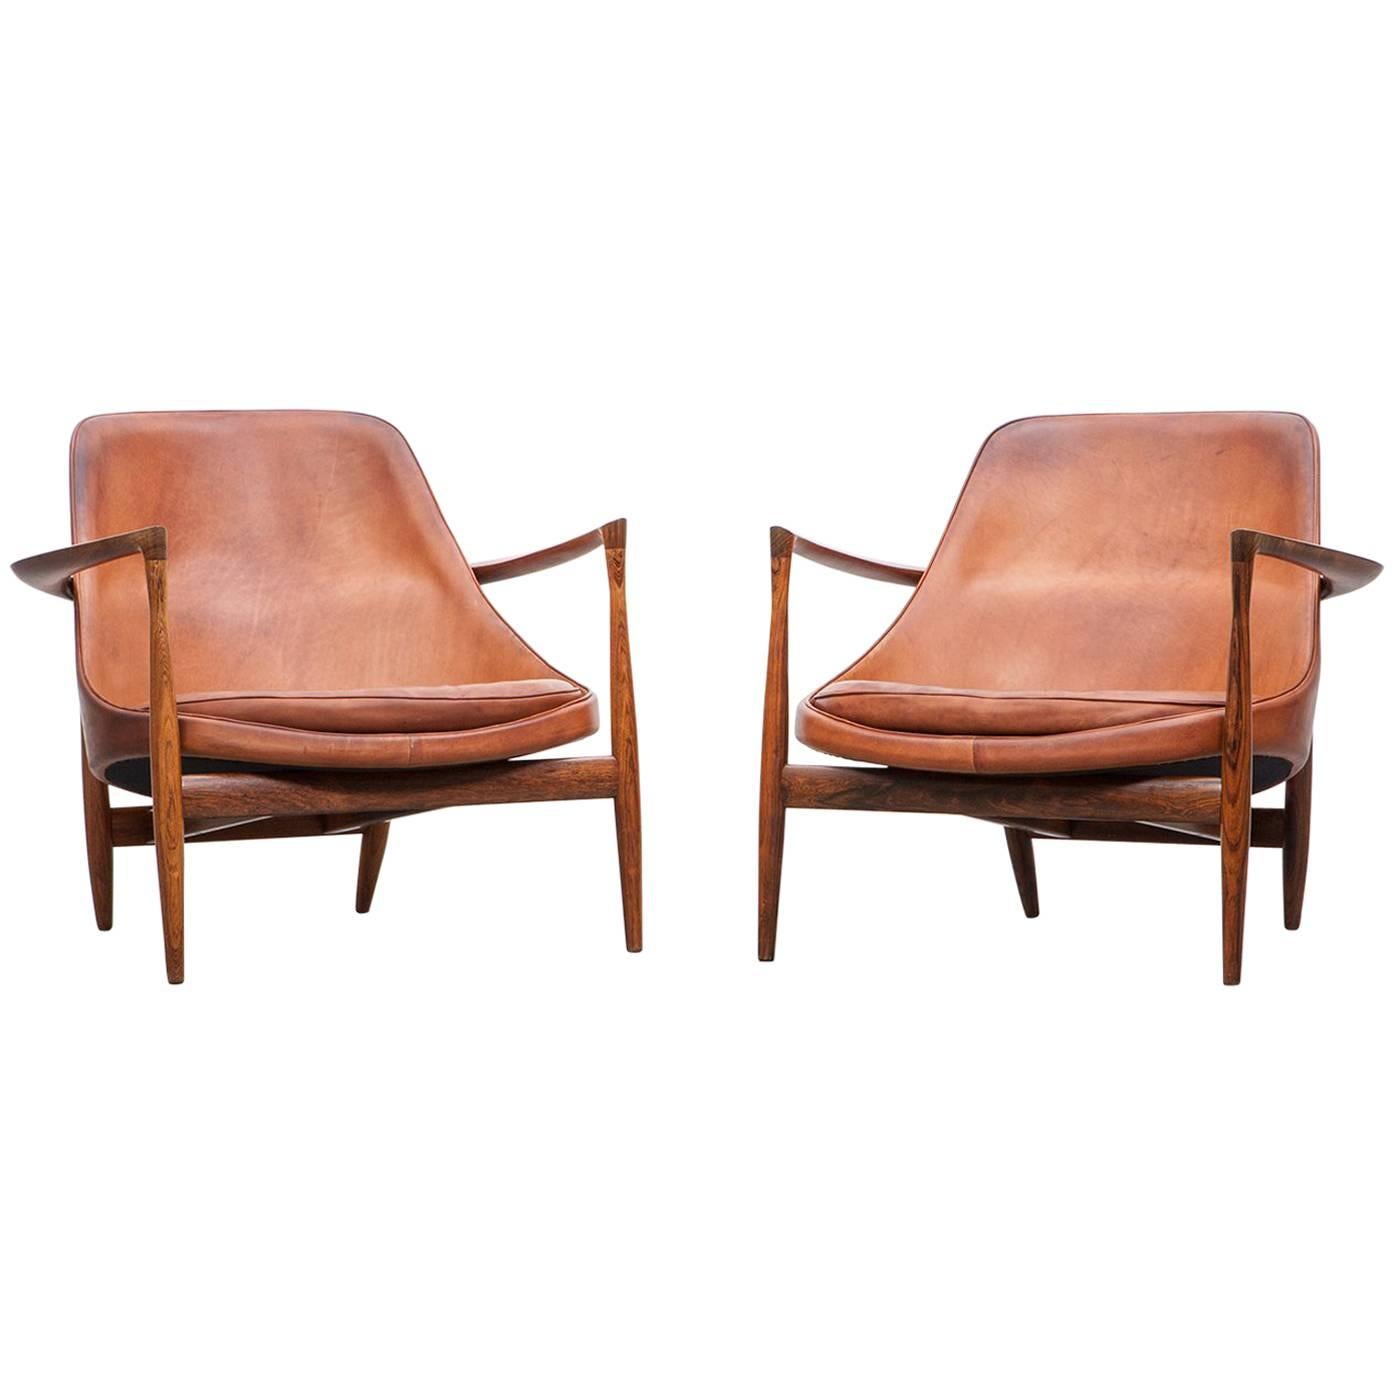 1950´s brown wooden and leather pair of Lounge Chairs by Ib Kofod-Larsen